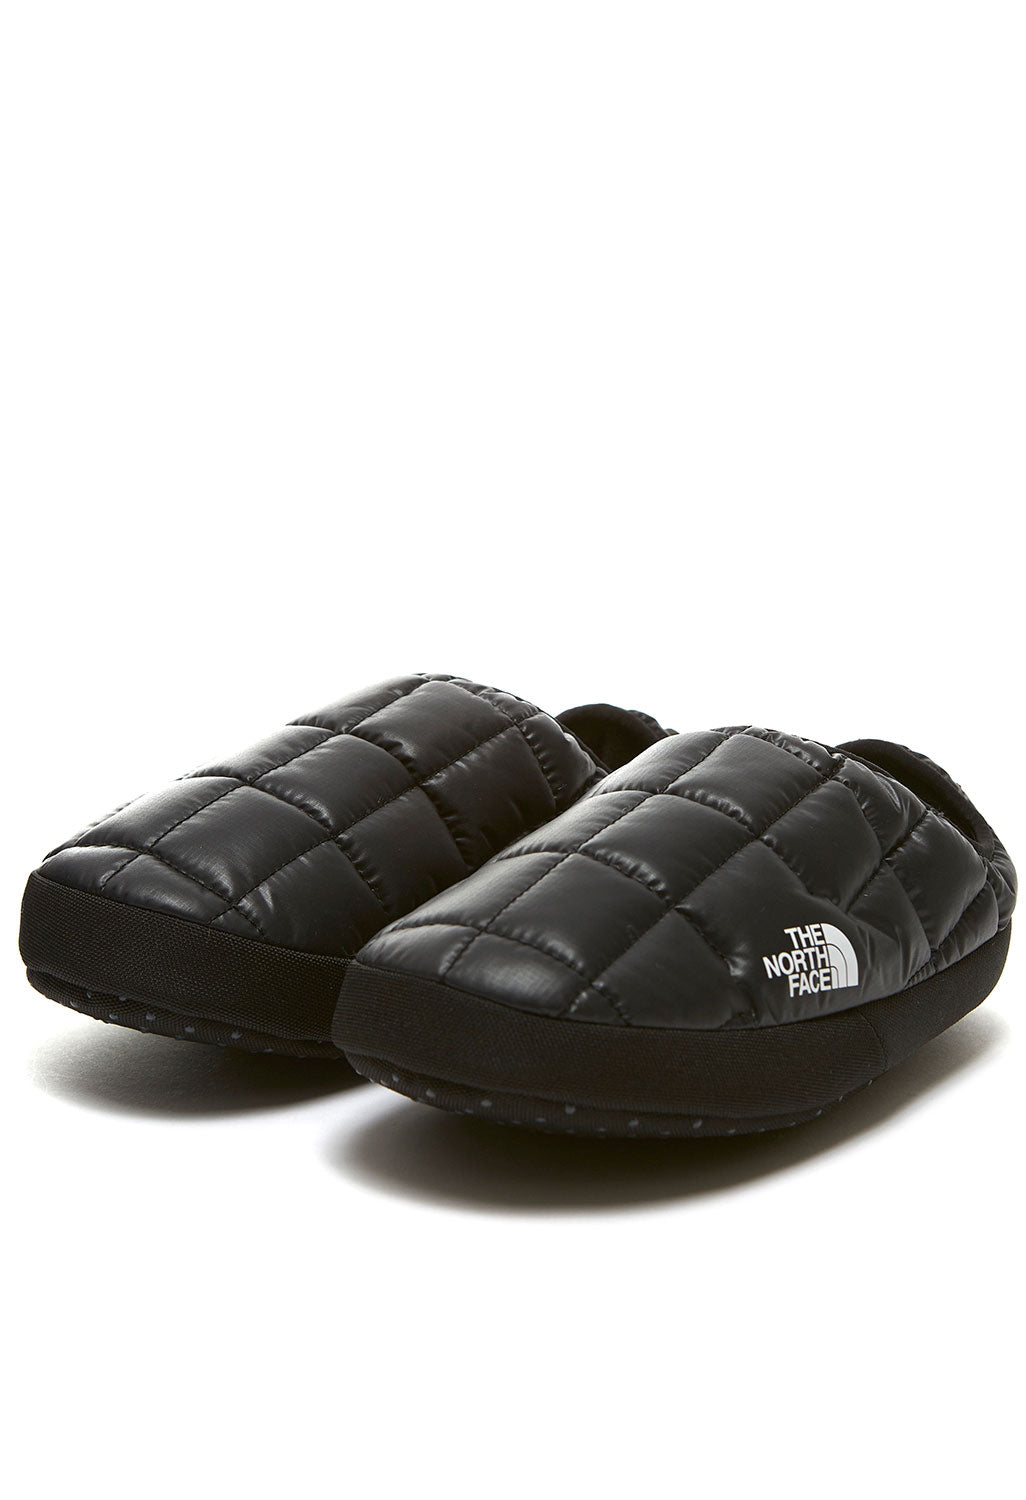 The North Face Women's ThermoBall V Mules - TNF Black/TNF Black